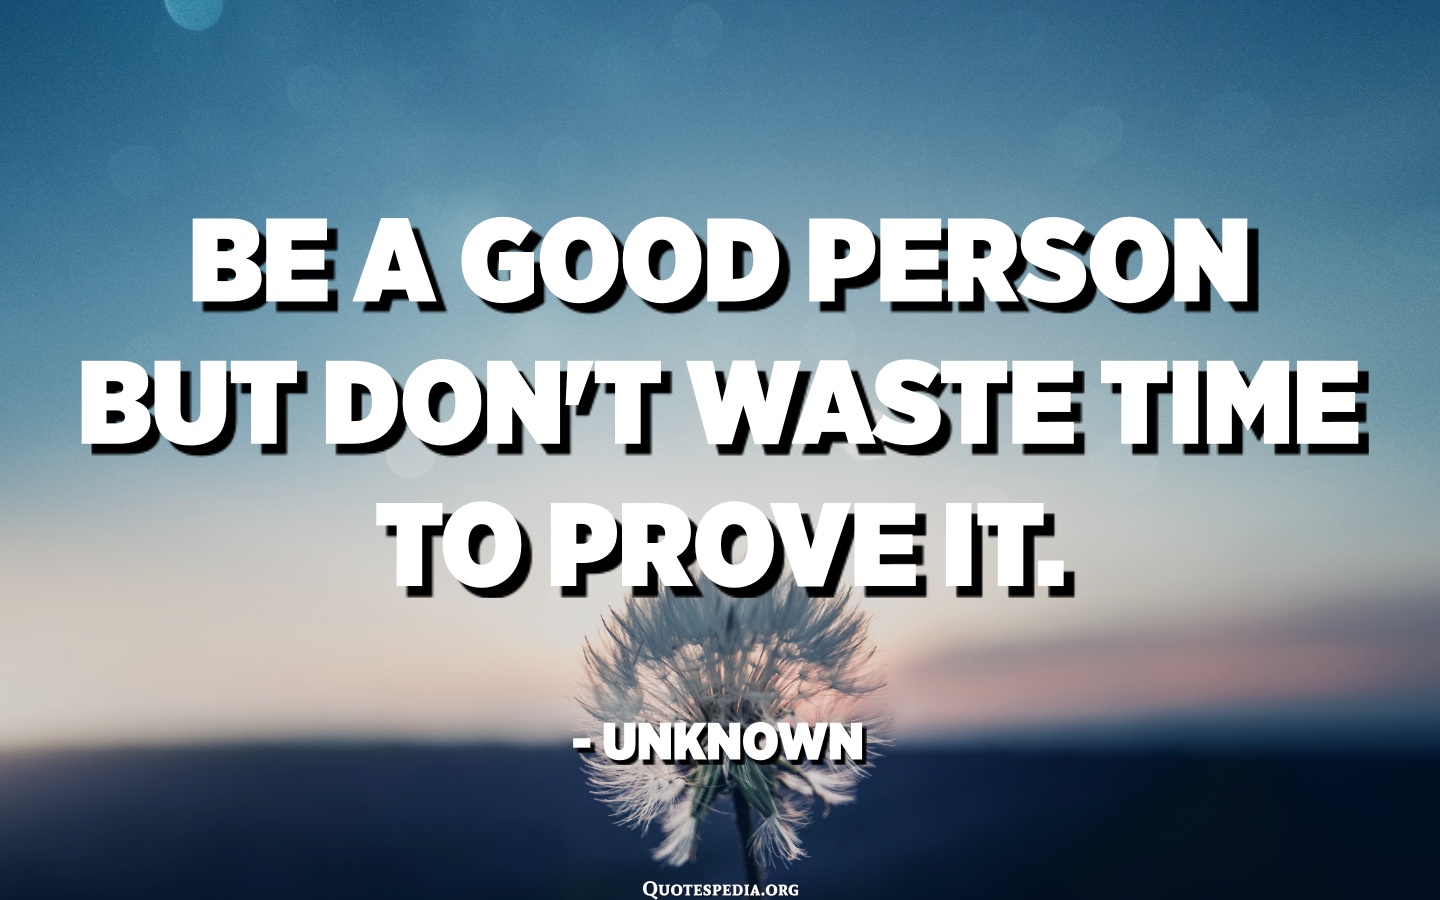 Be a good person but don't waste time to prove it